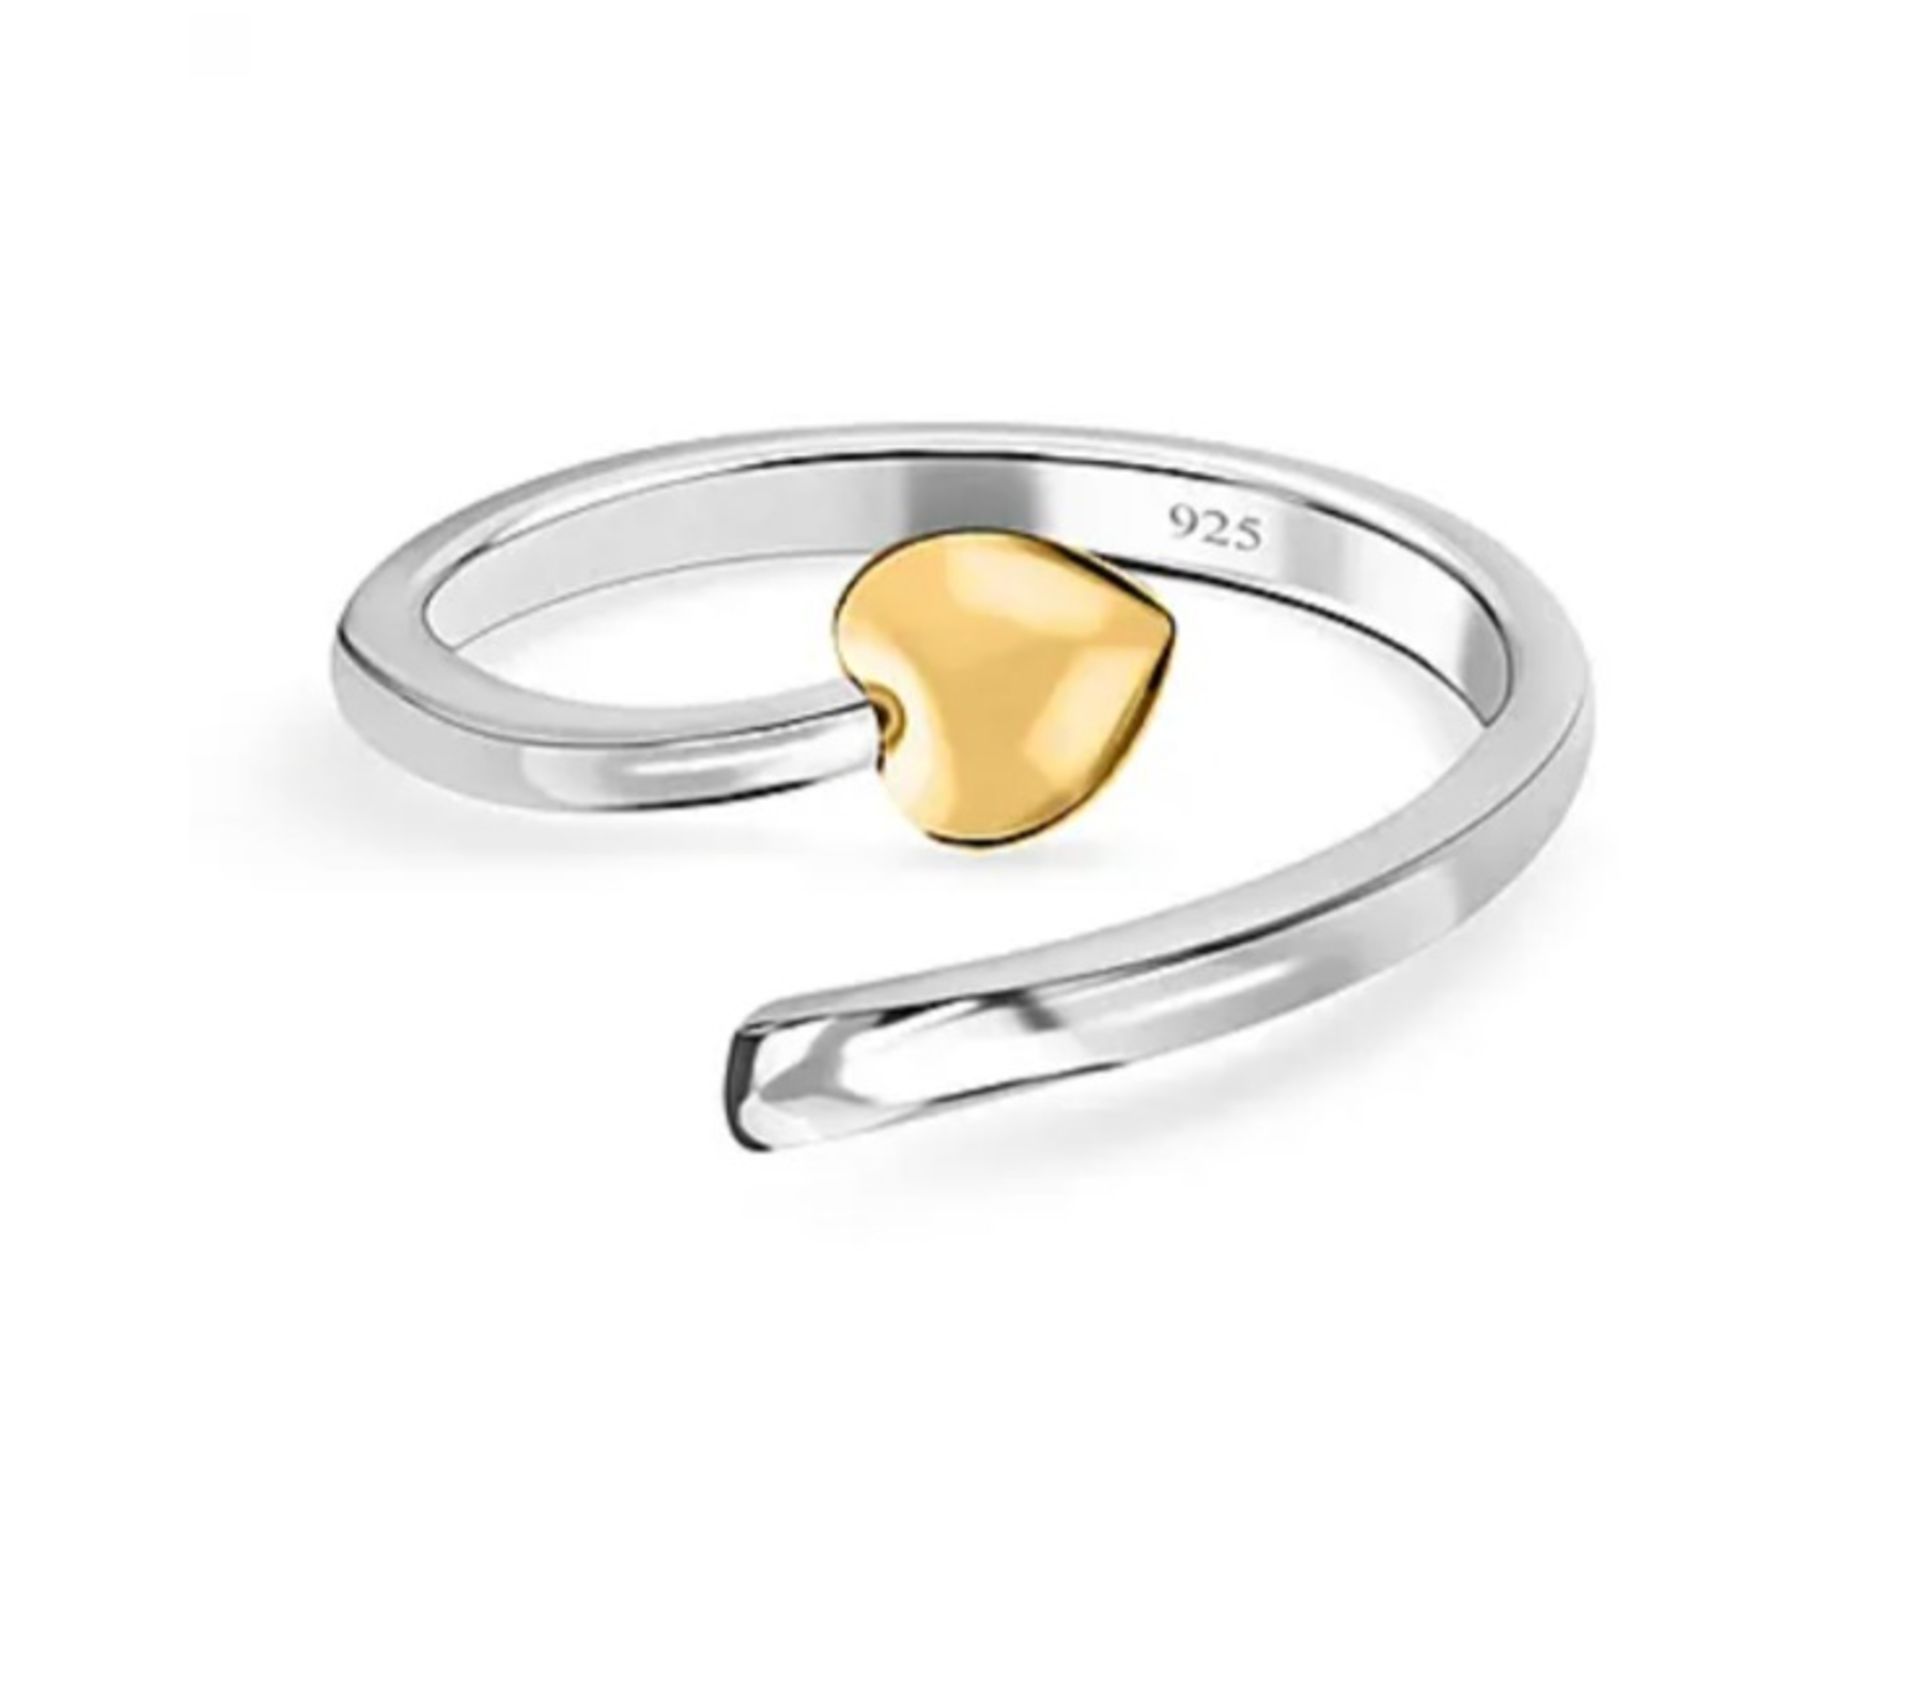 NEW! Platinum and 18K Yellow Gold Vermeil Plated Sterling Silver Adjustable Heart Ring - Image 3 of 5